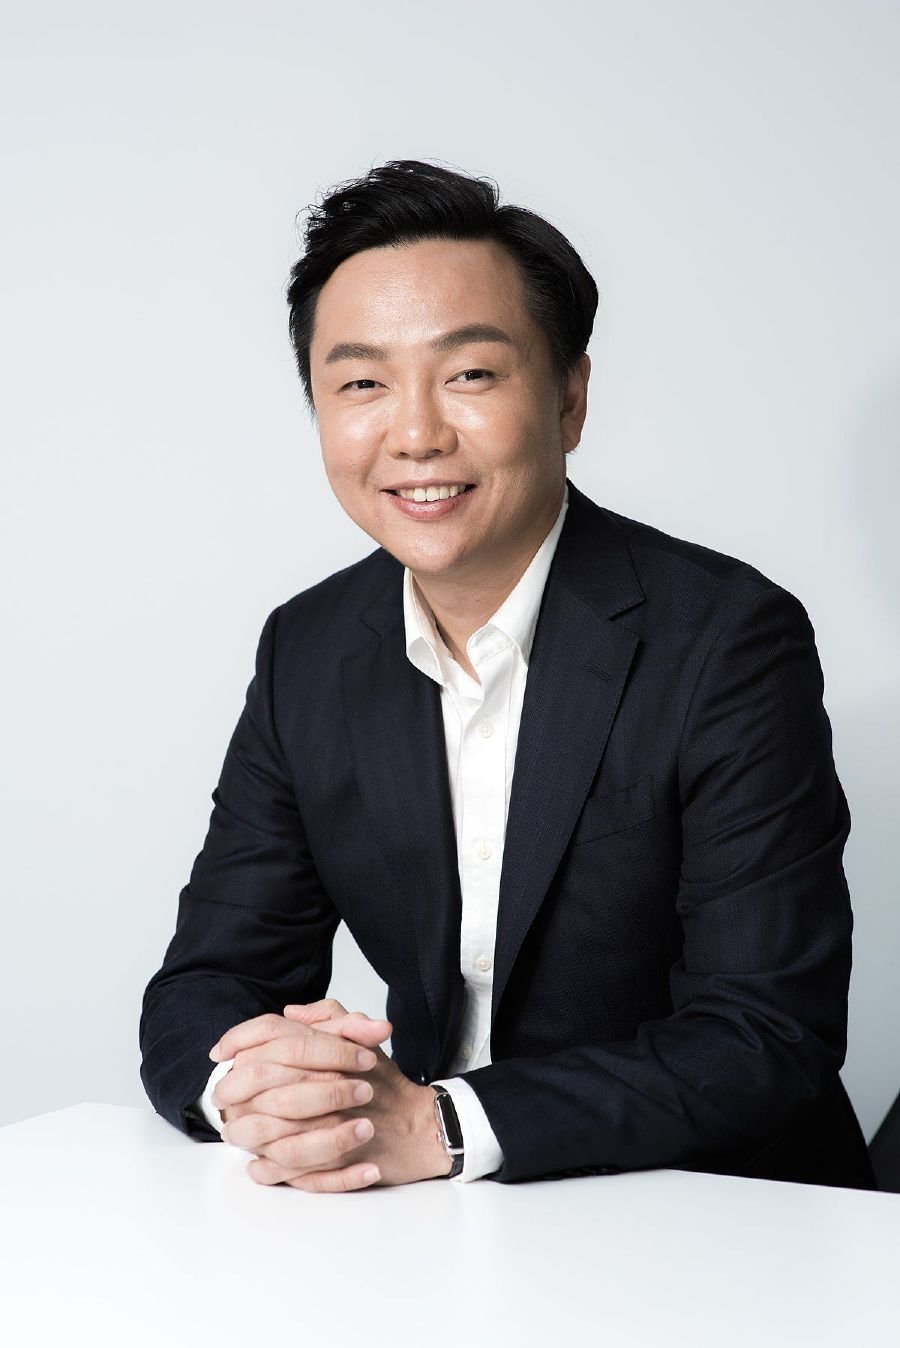 Loyalty e-commerce aggregator Presto has expanded into the Singapore and Thailand markets, bringing its innovative ecosystem to a wider audience.